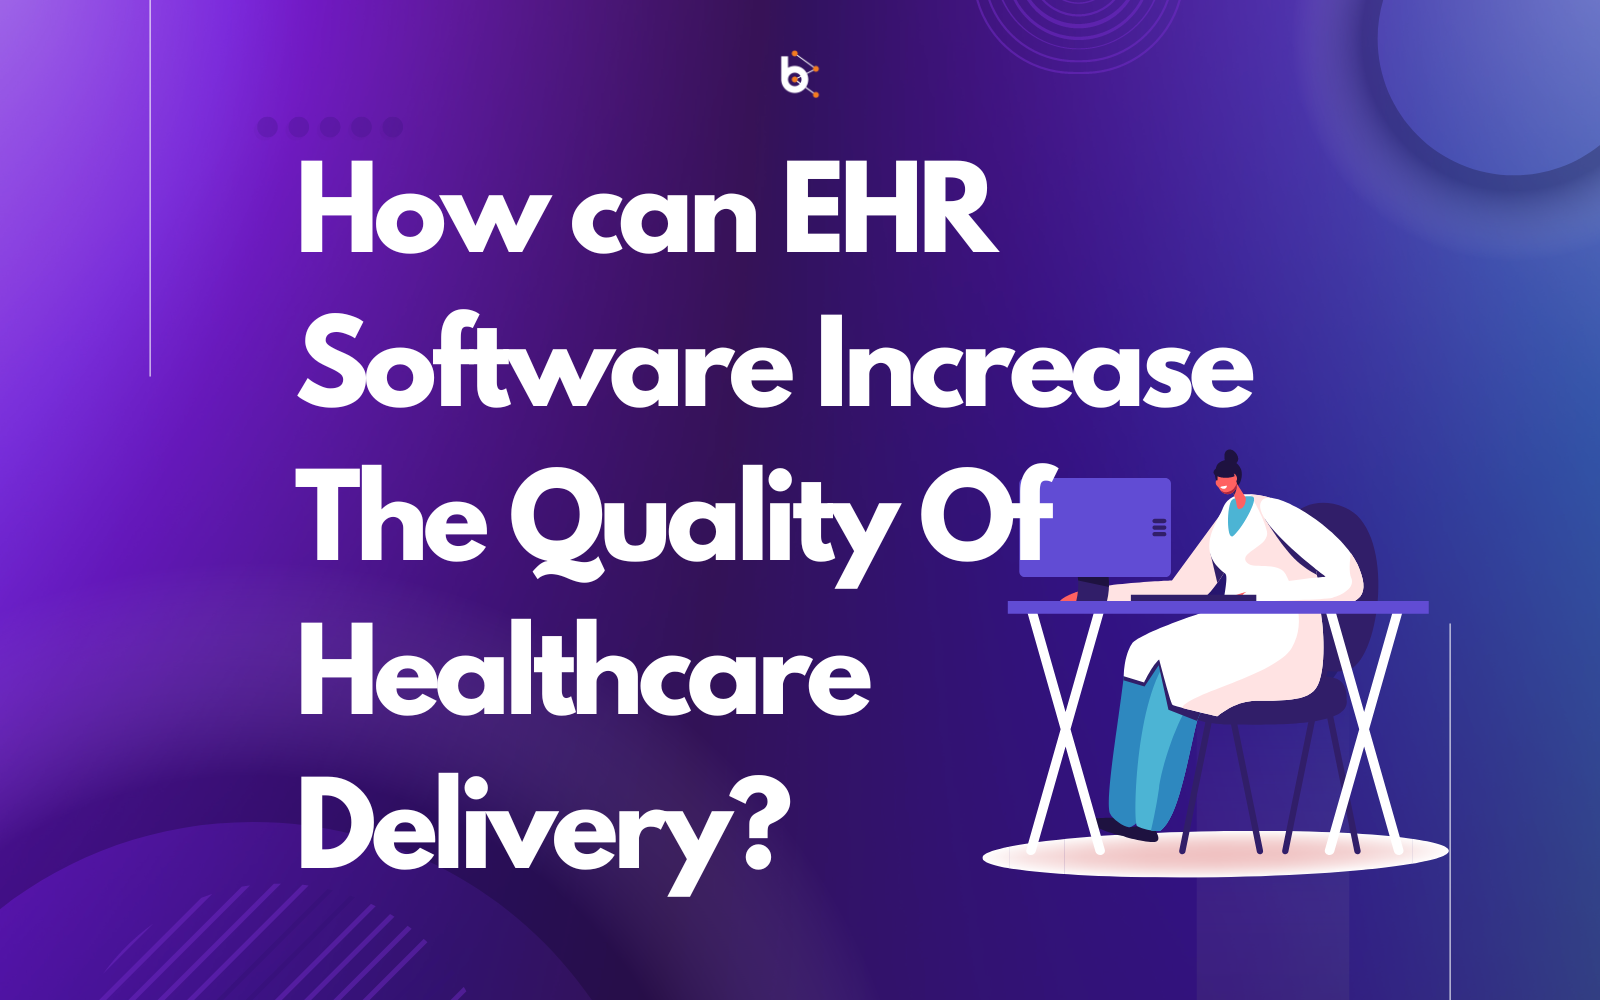 How Can EHR Software Increase The Quality of Healthcare Delivery?